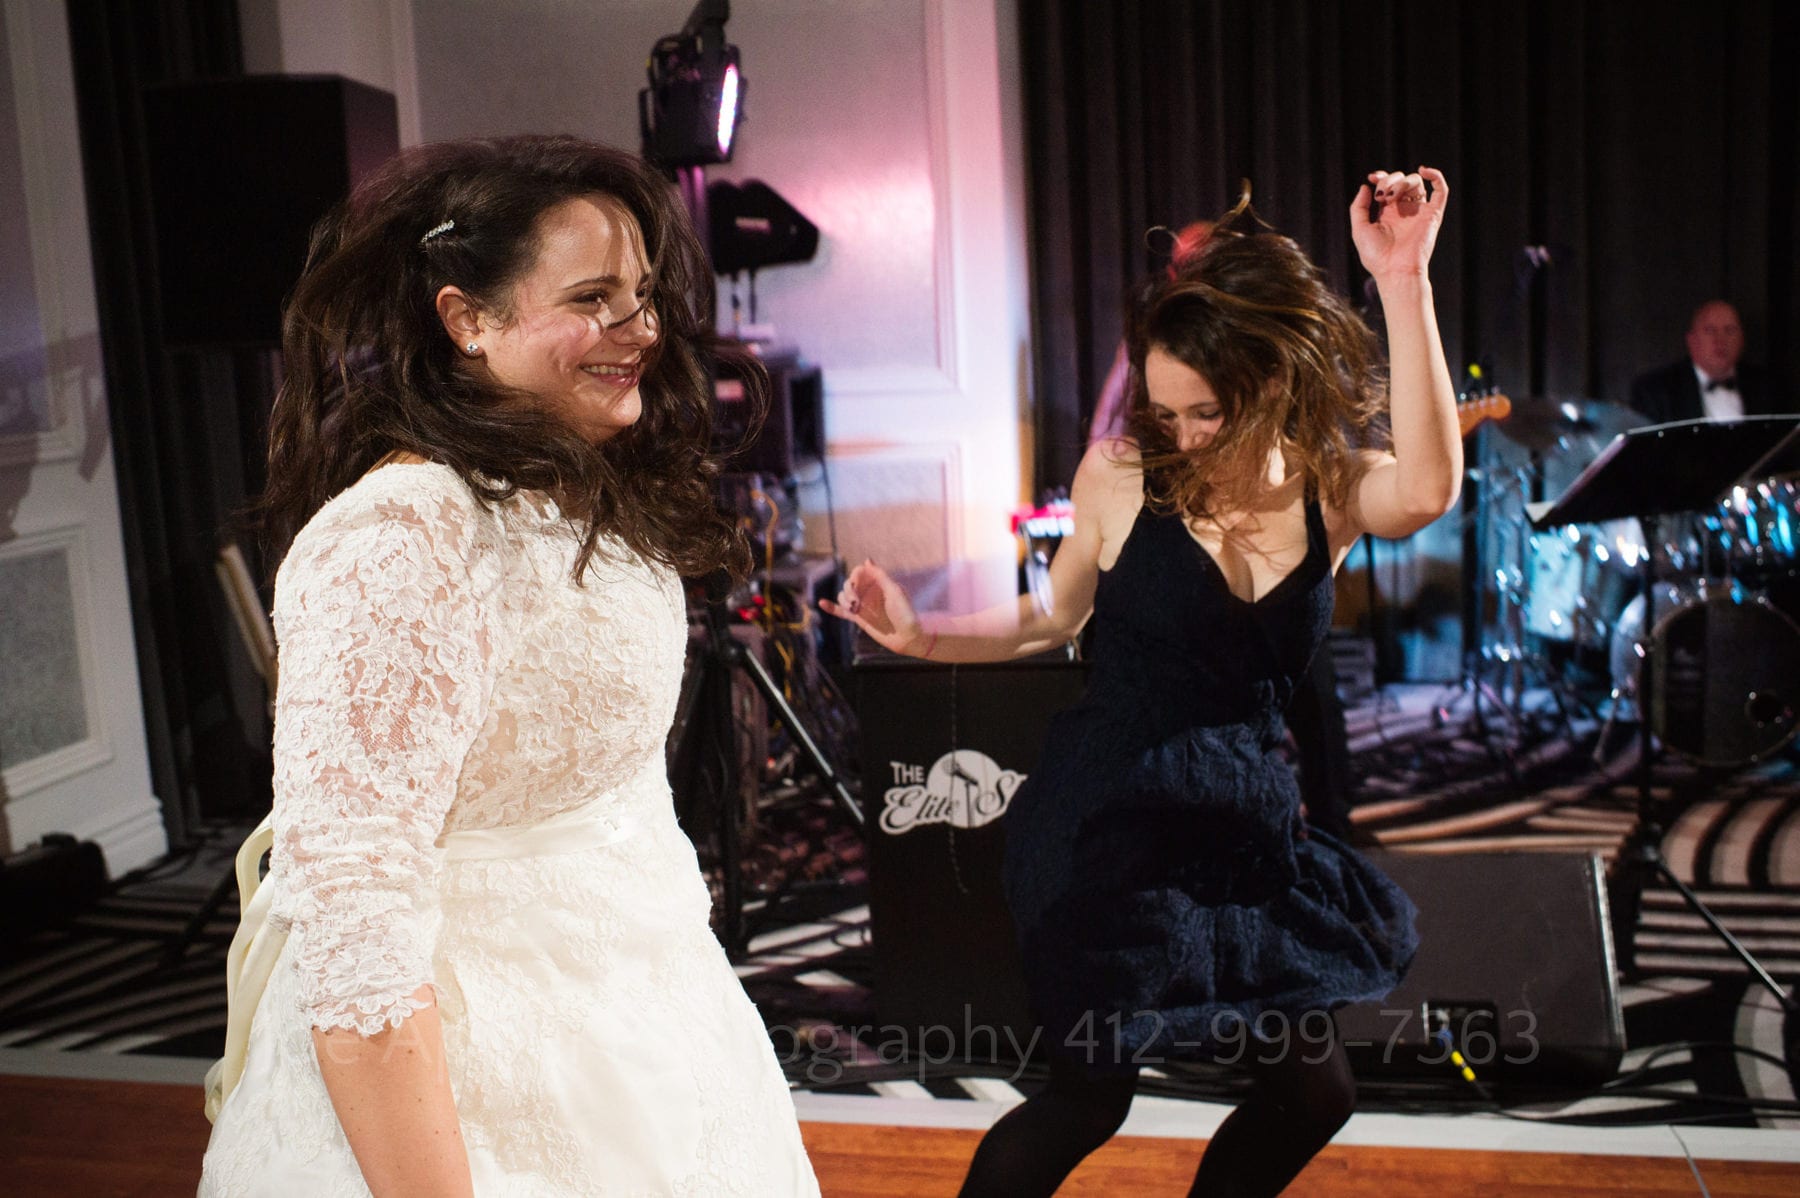 a bride in a white lace dress with sleeves and her friend in a black strap dress jump and dance as their hair flies around them.